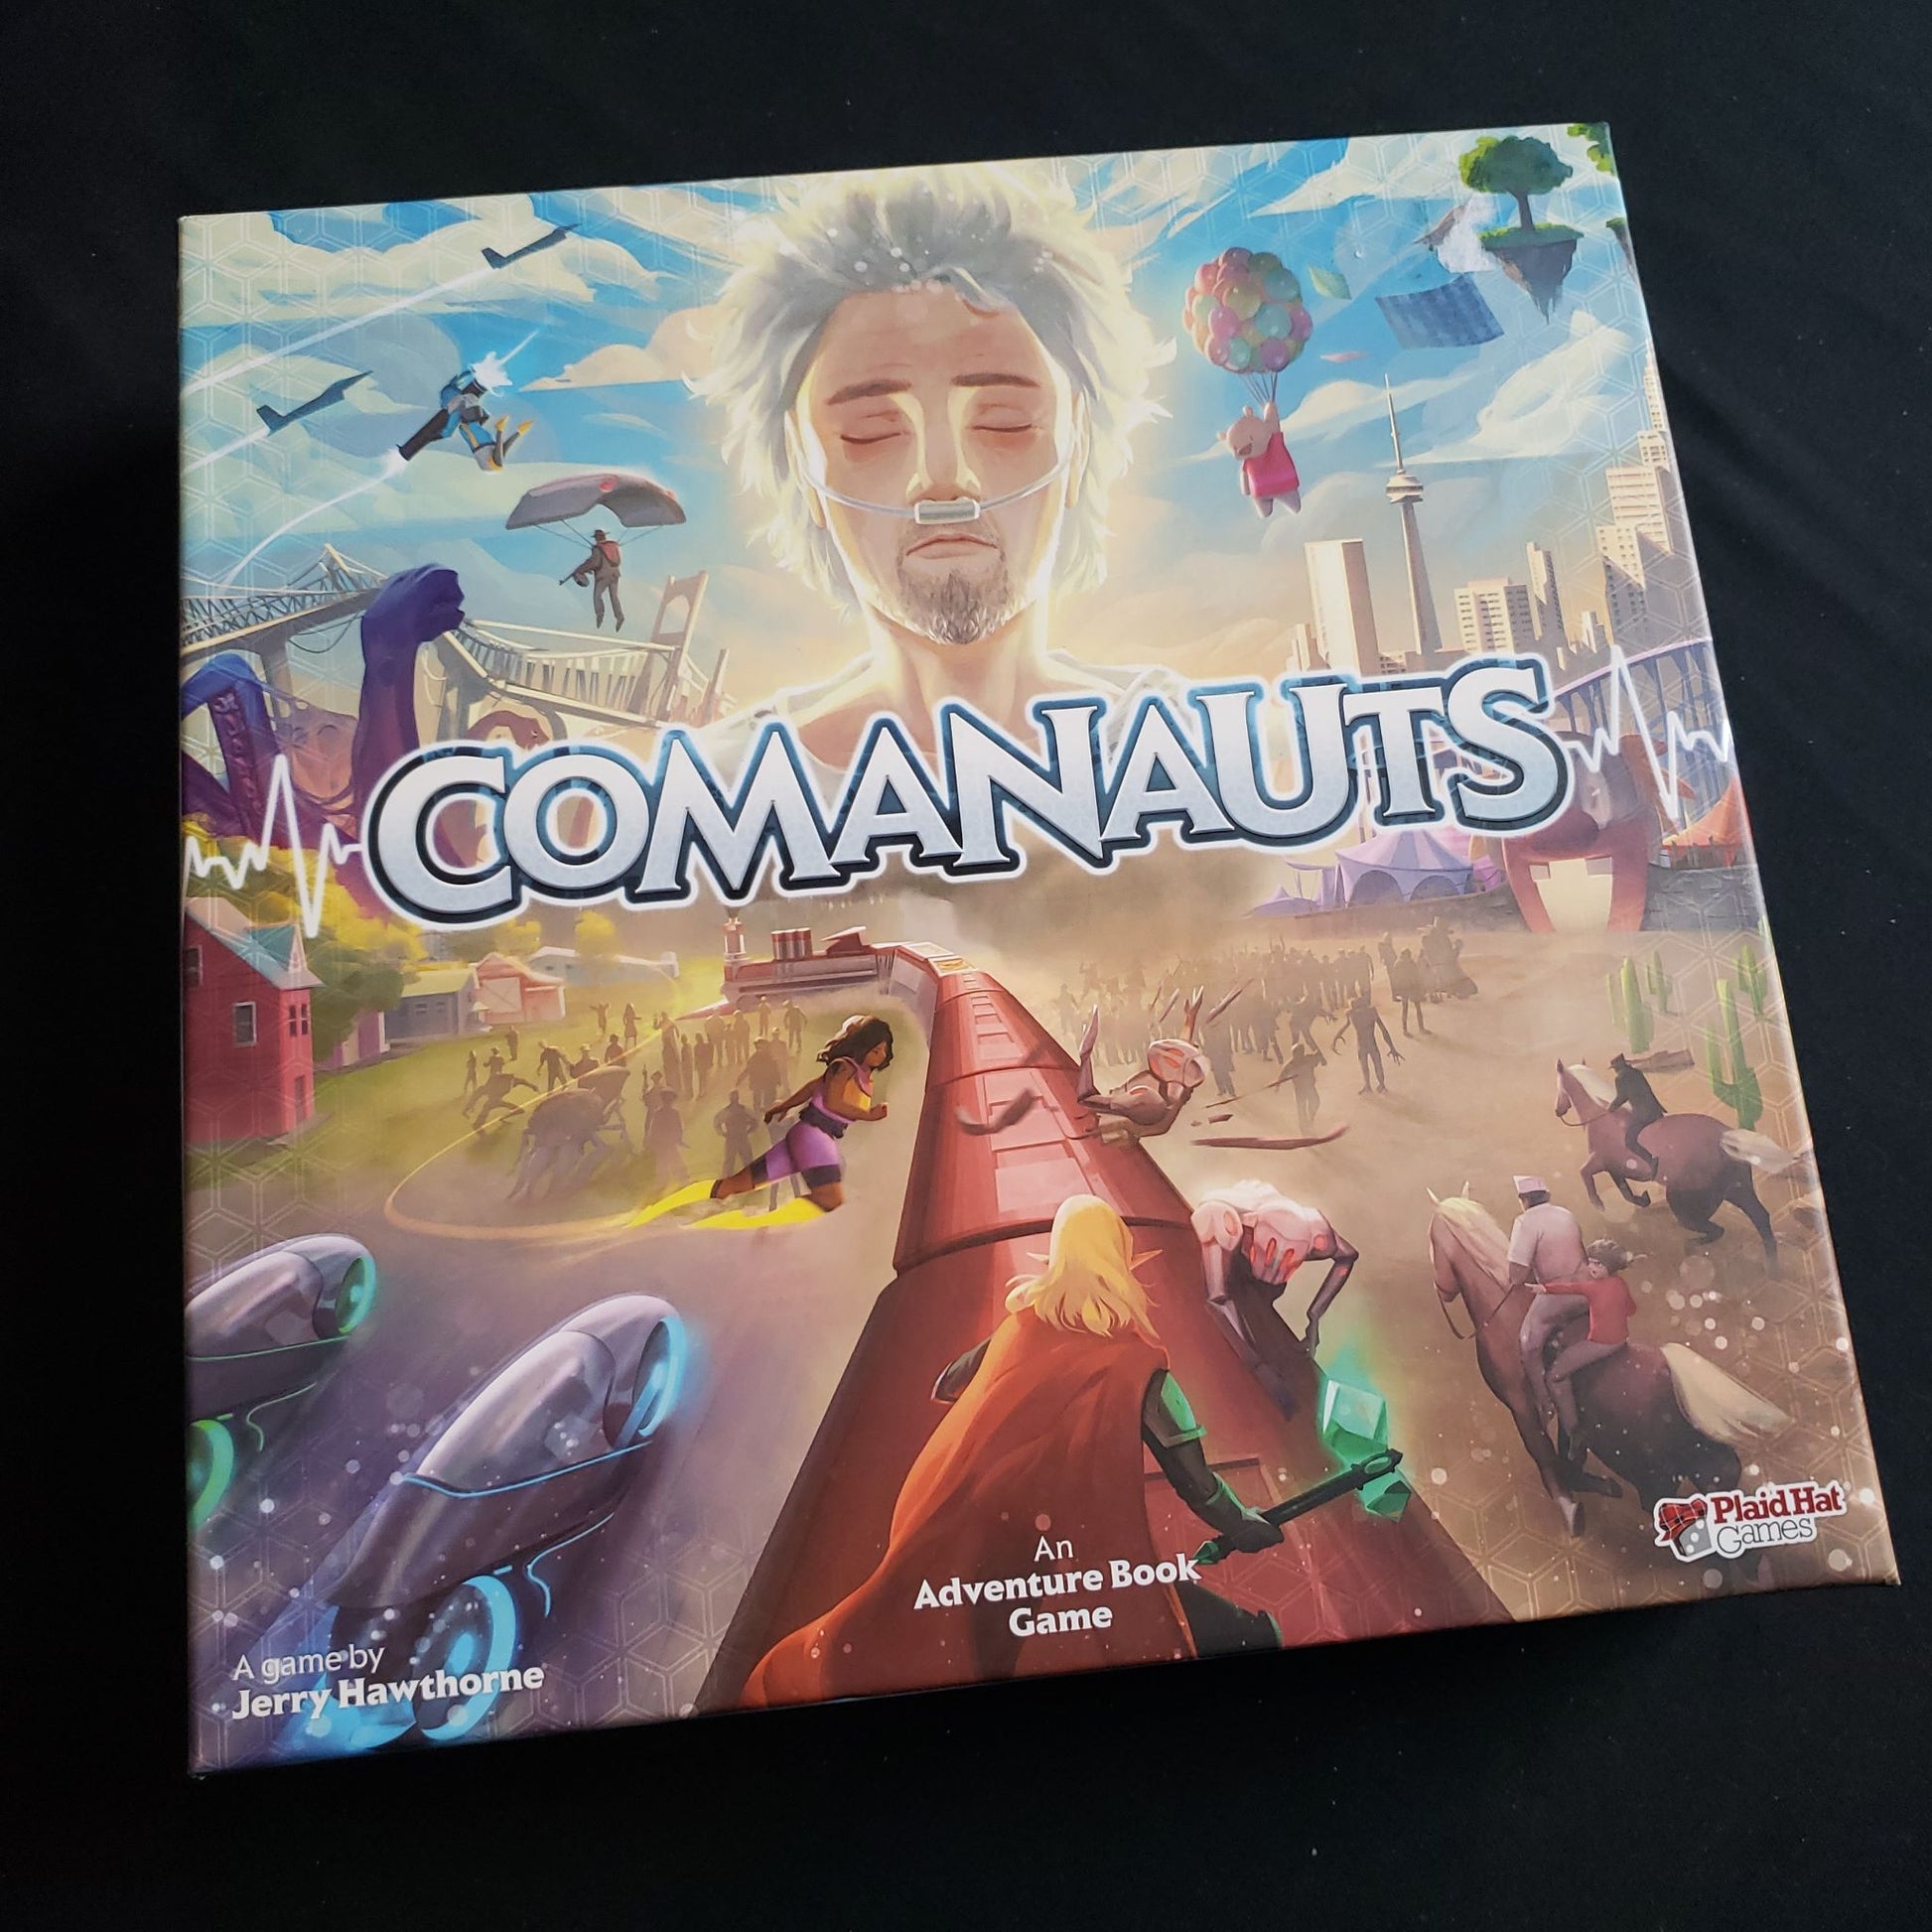 Image shows the front cover of the box of the Comanauts board game